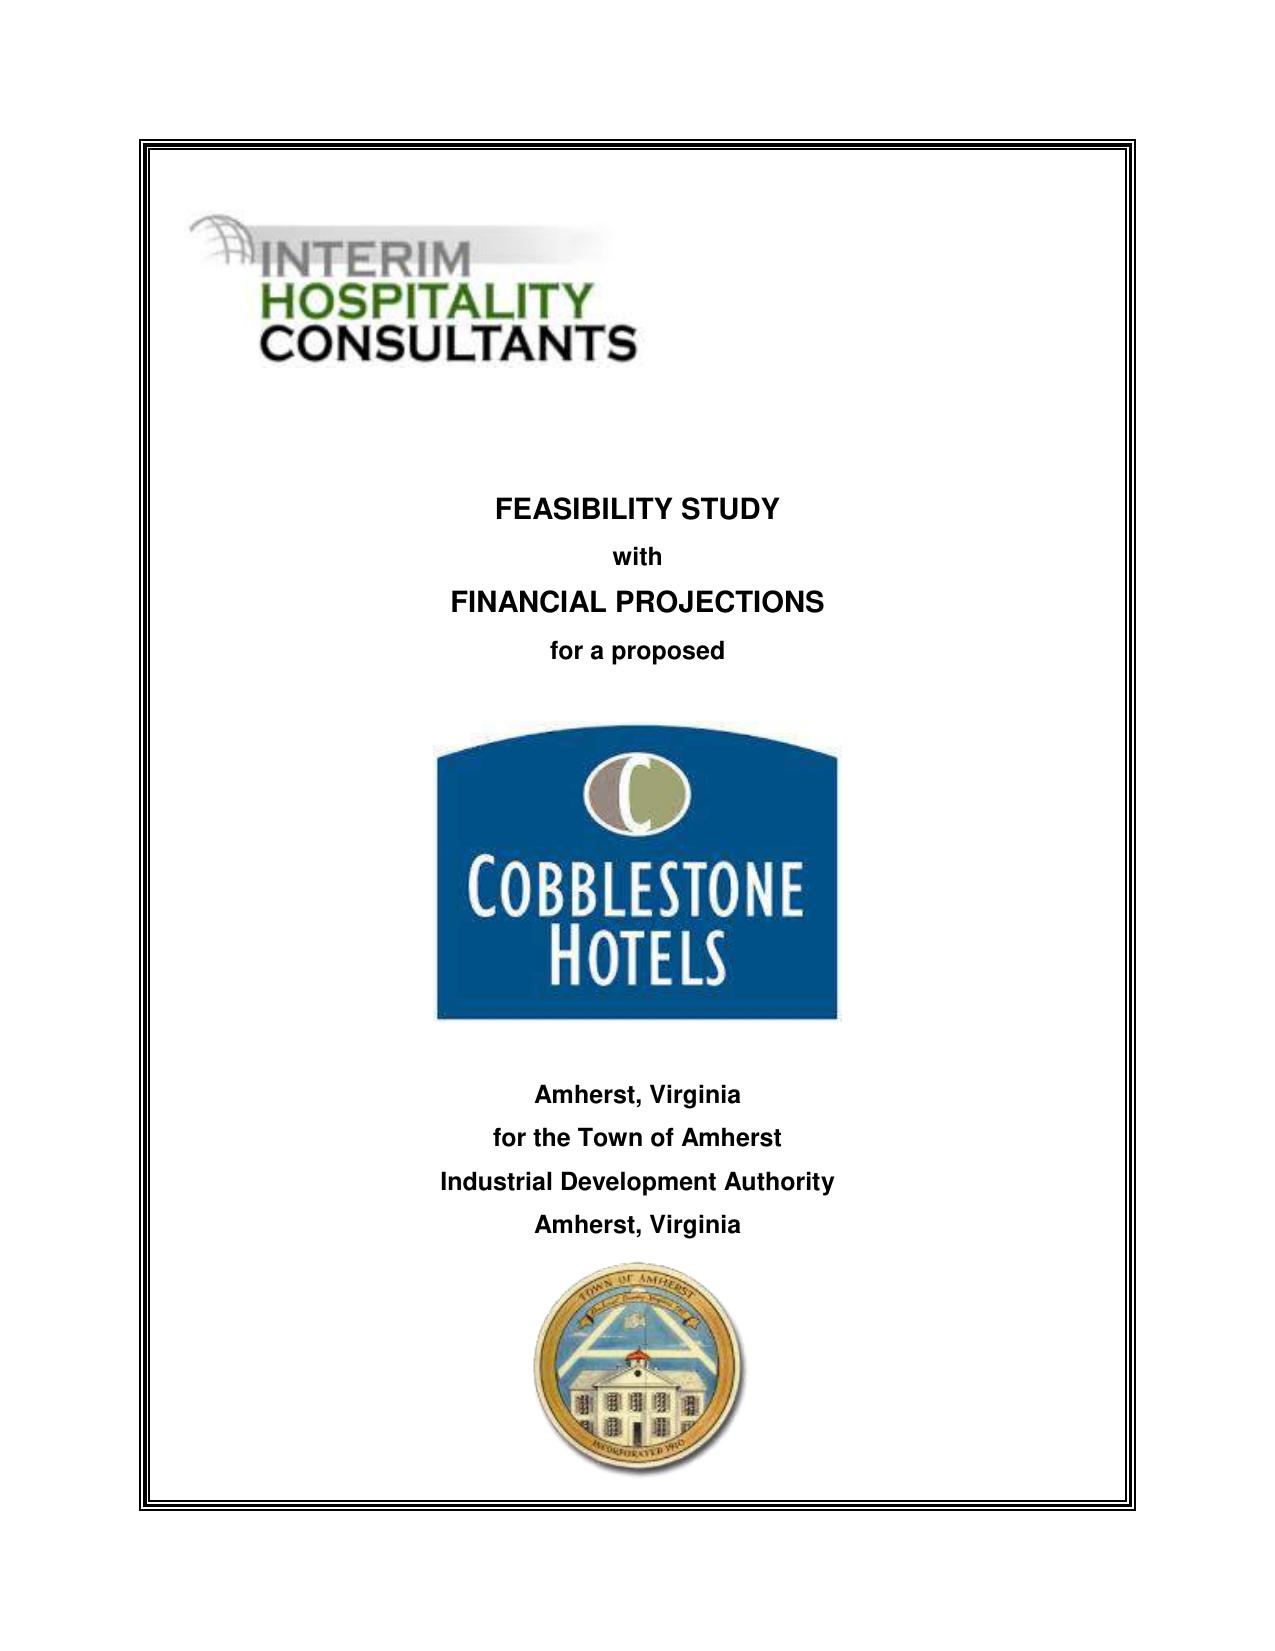 Hotel-Feasibility Study Financial Projections 2014